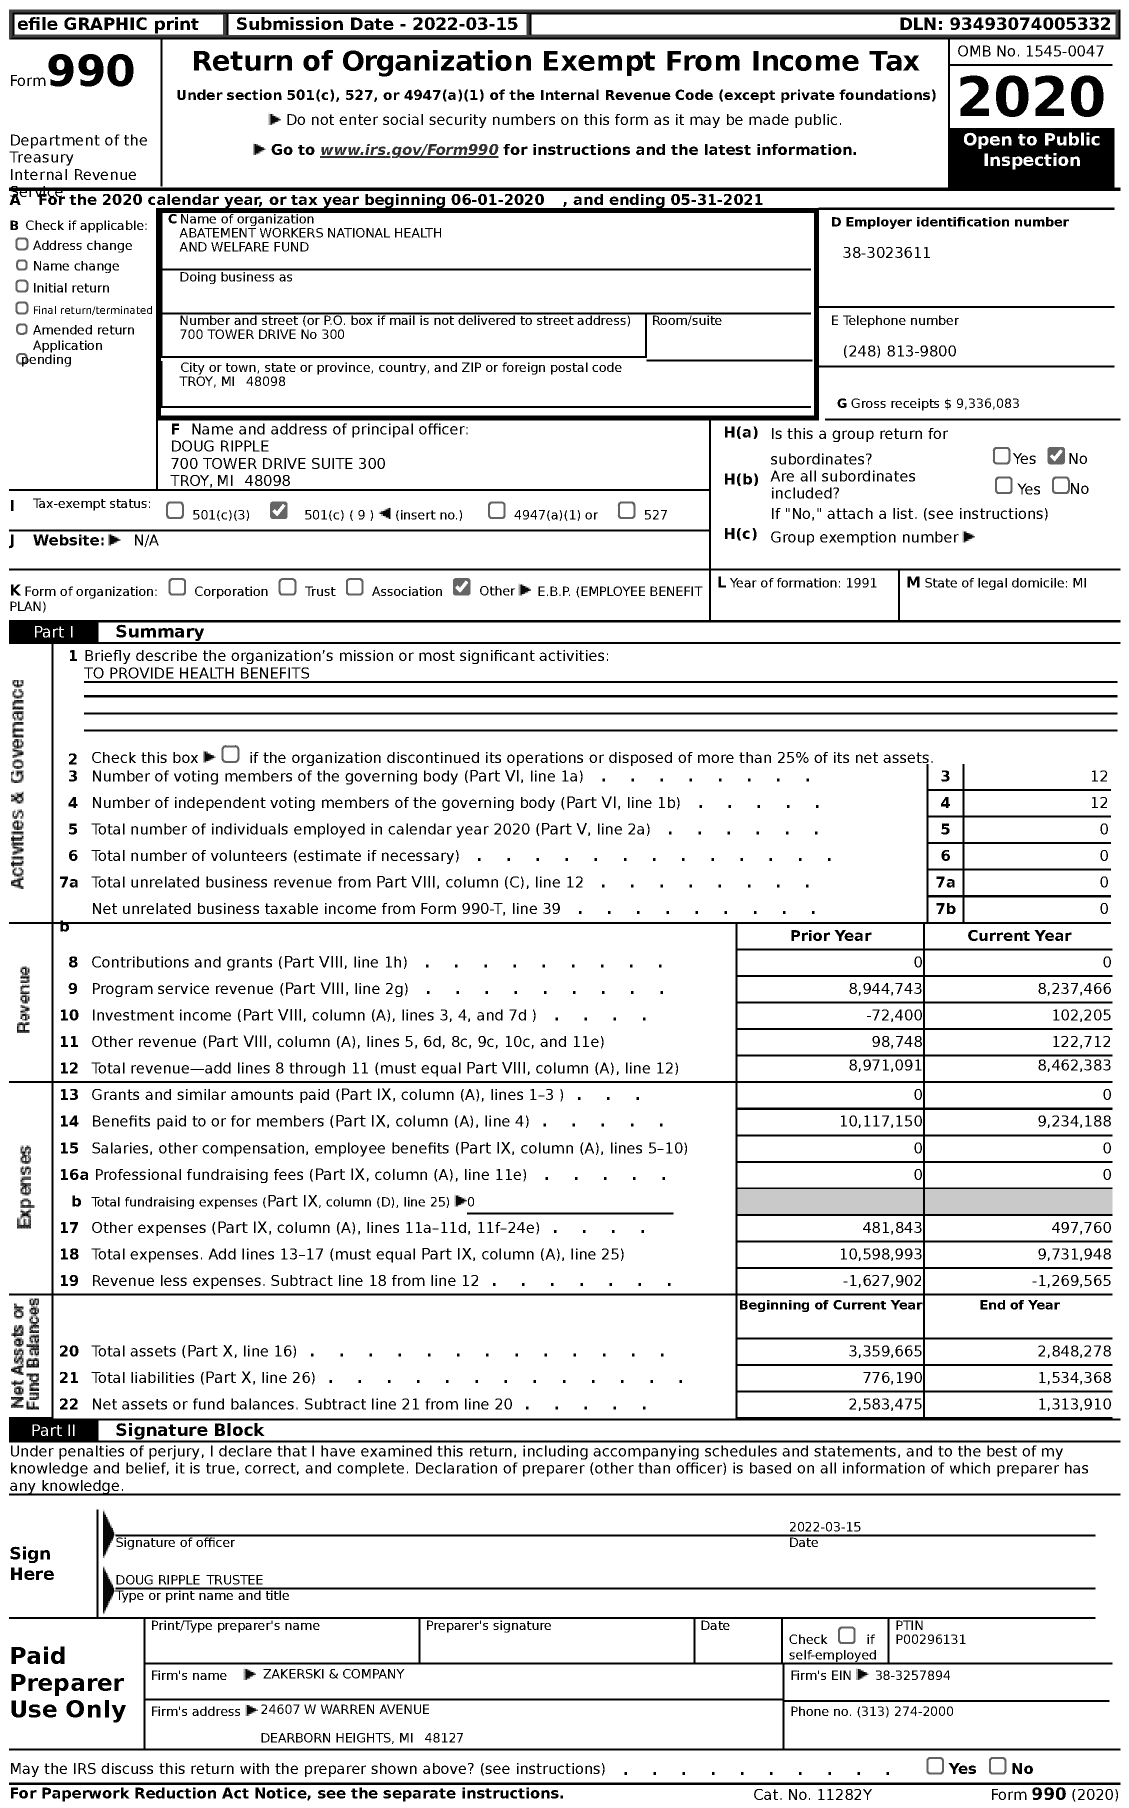 Image of first page of 2020 Form 990 for Abatement Workers National Health and Welfare Fund